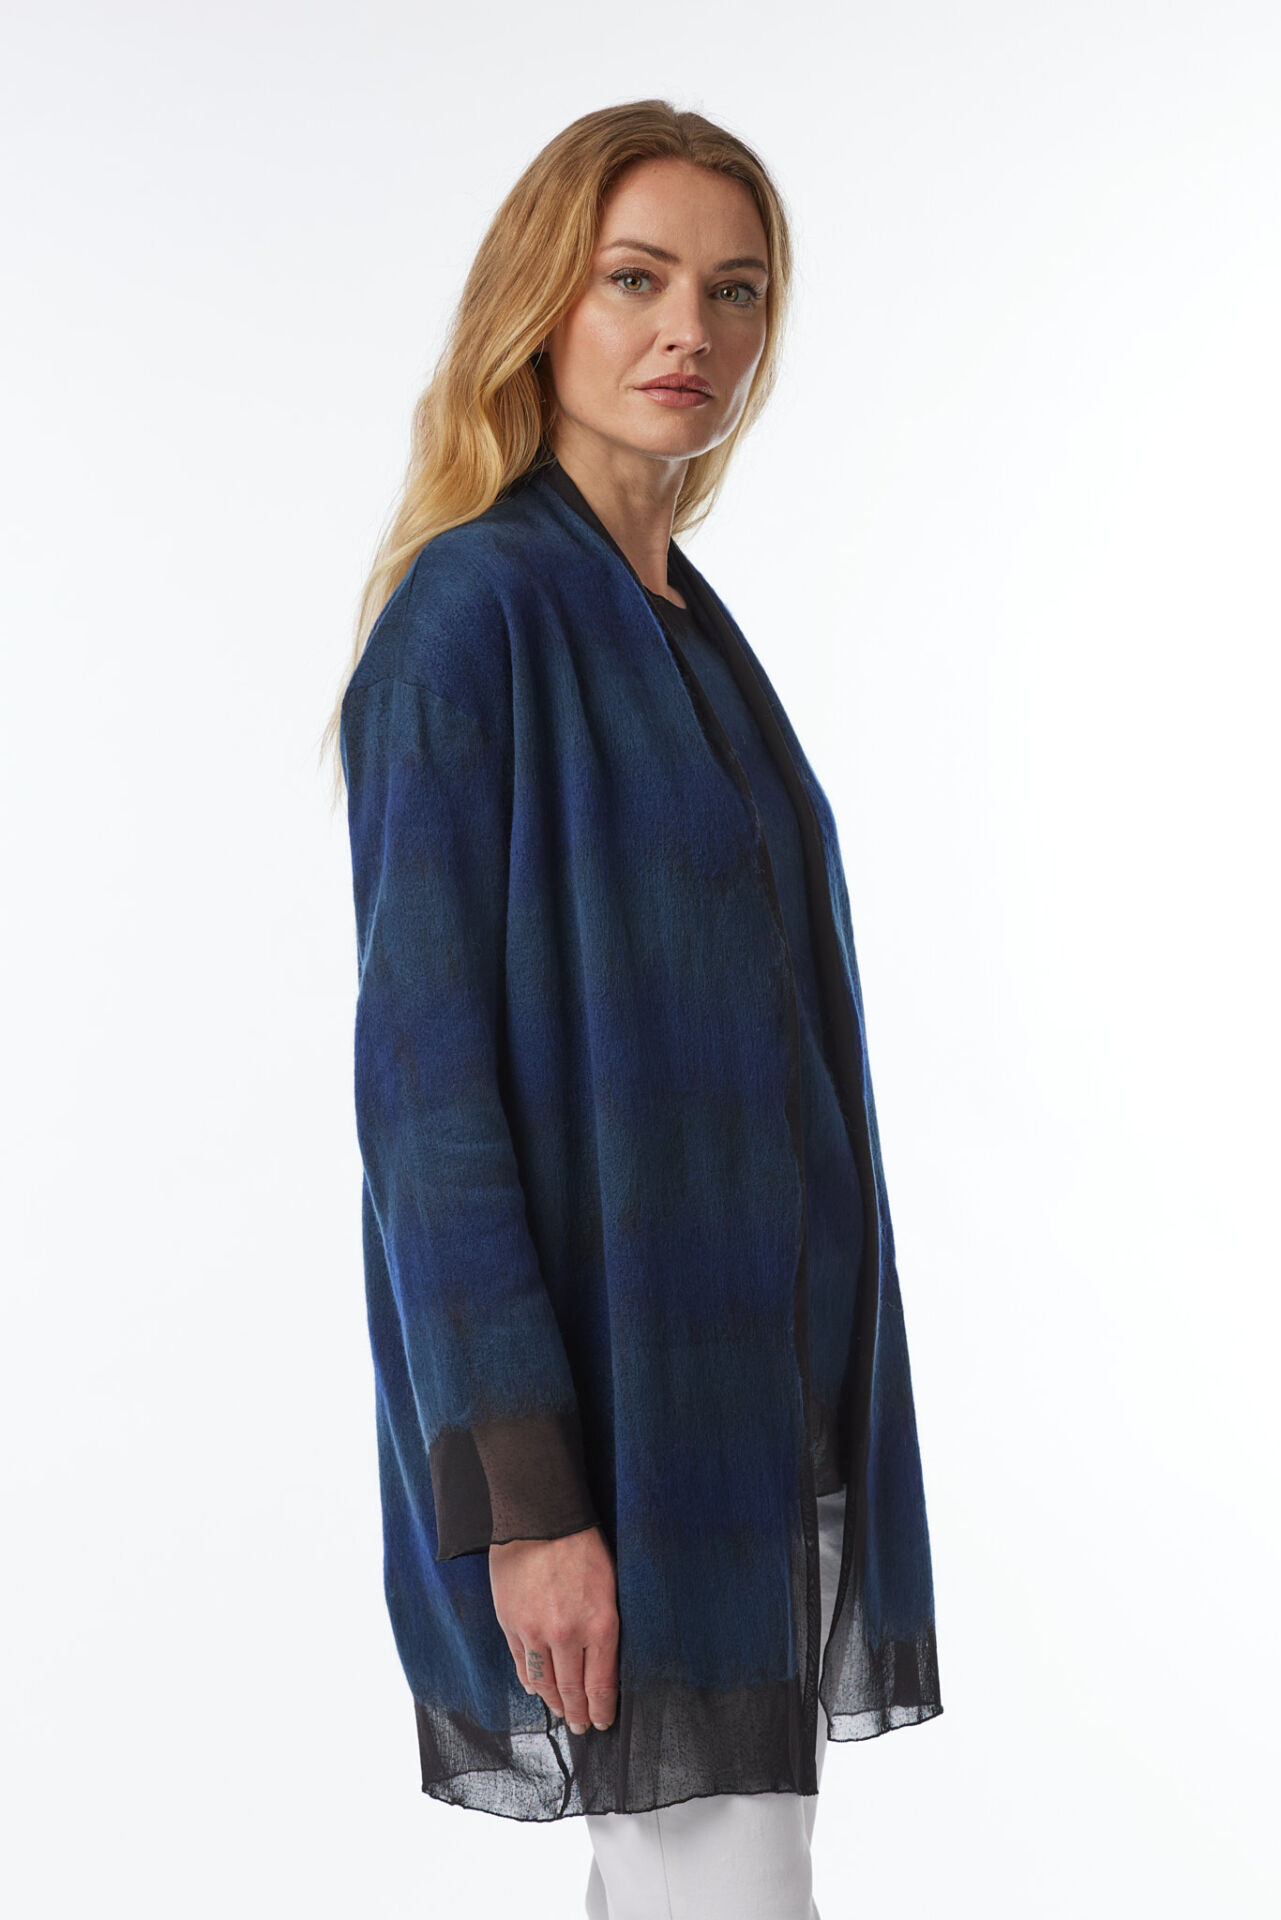 buttonless cardigan in tulle with a contrasting bi-colours needle-punched motiv in 100% wool, long sleeves